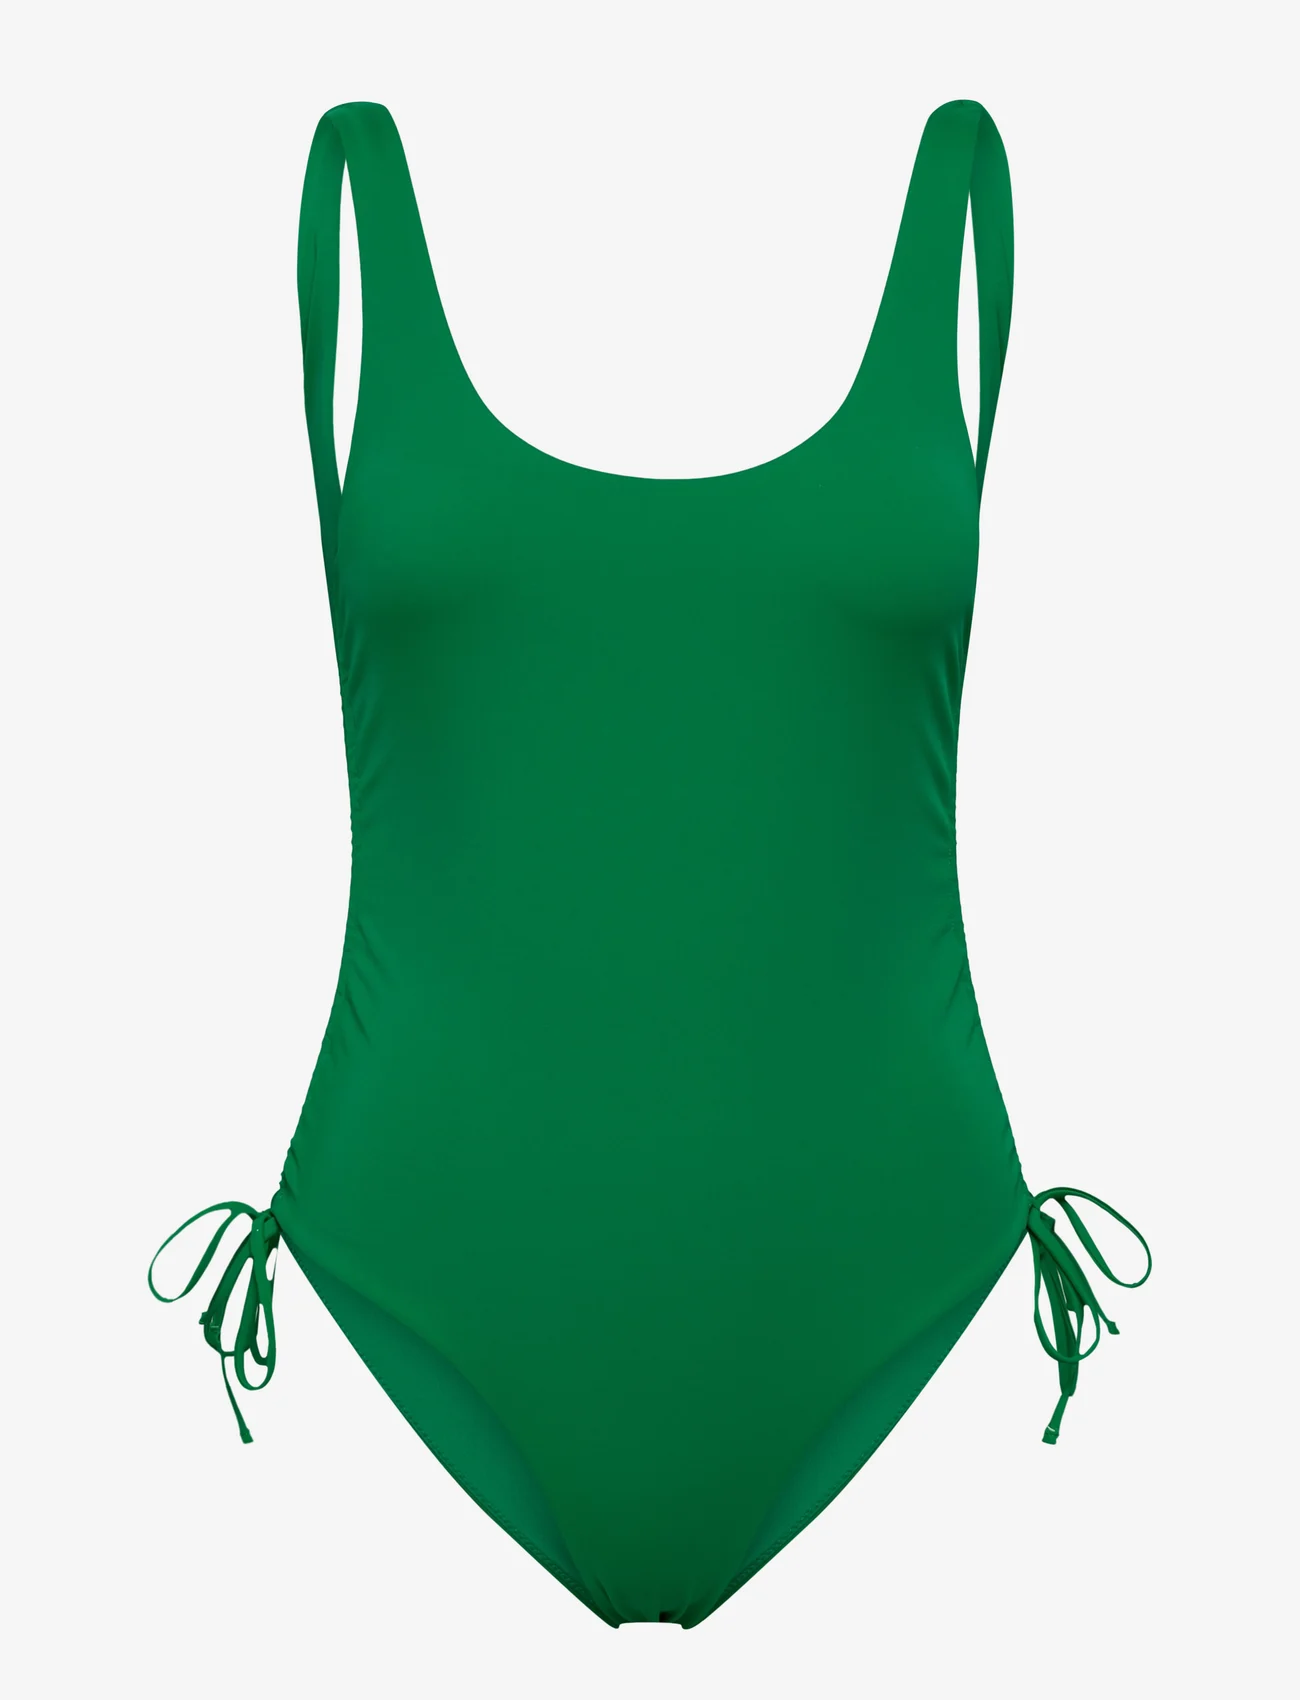 Envii - ENDROP SWIMSUIT 5782 - swimsuits - jolly green - 0